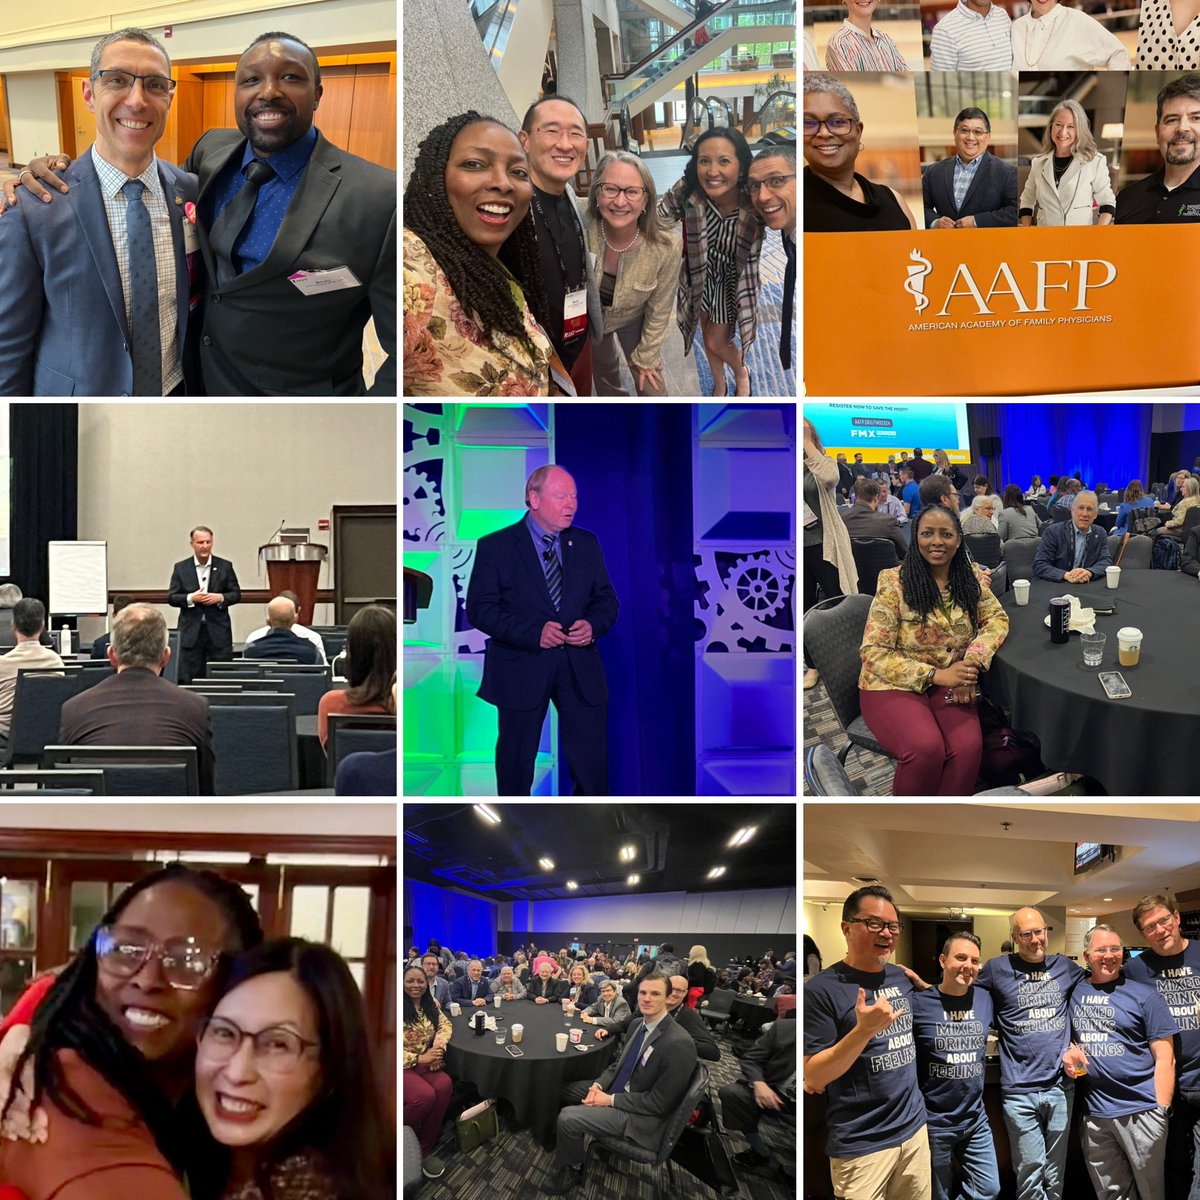 Finally have a moment to share some memories from my last @aafp #ALF #NCCL BoardMtg as an officer. Return next year as a general registrant! Love my #FMfamily